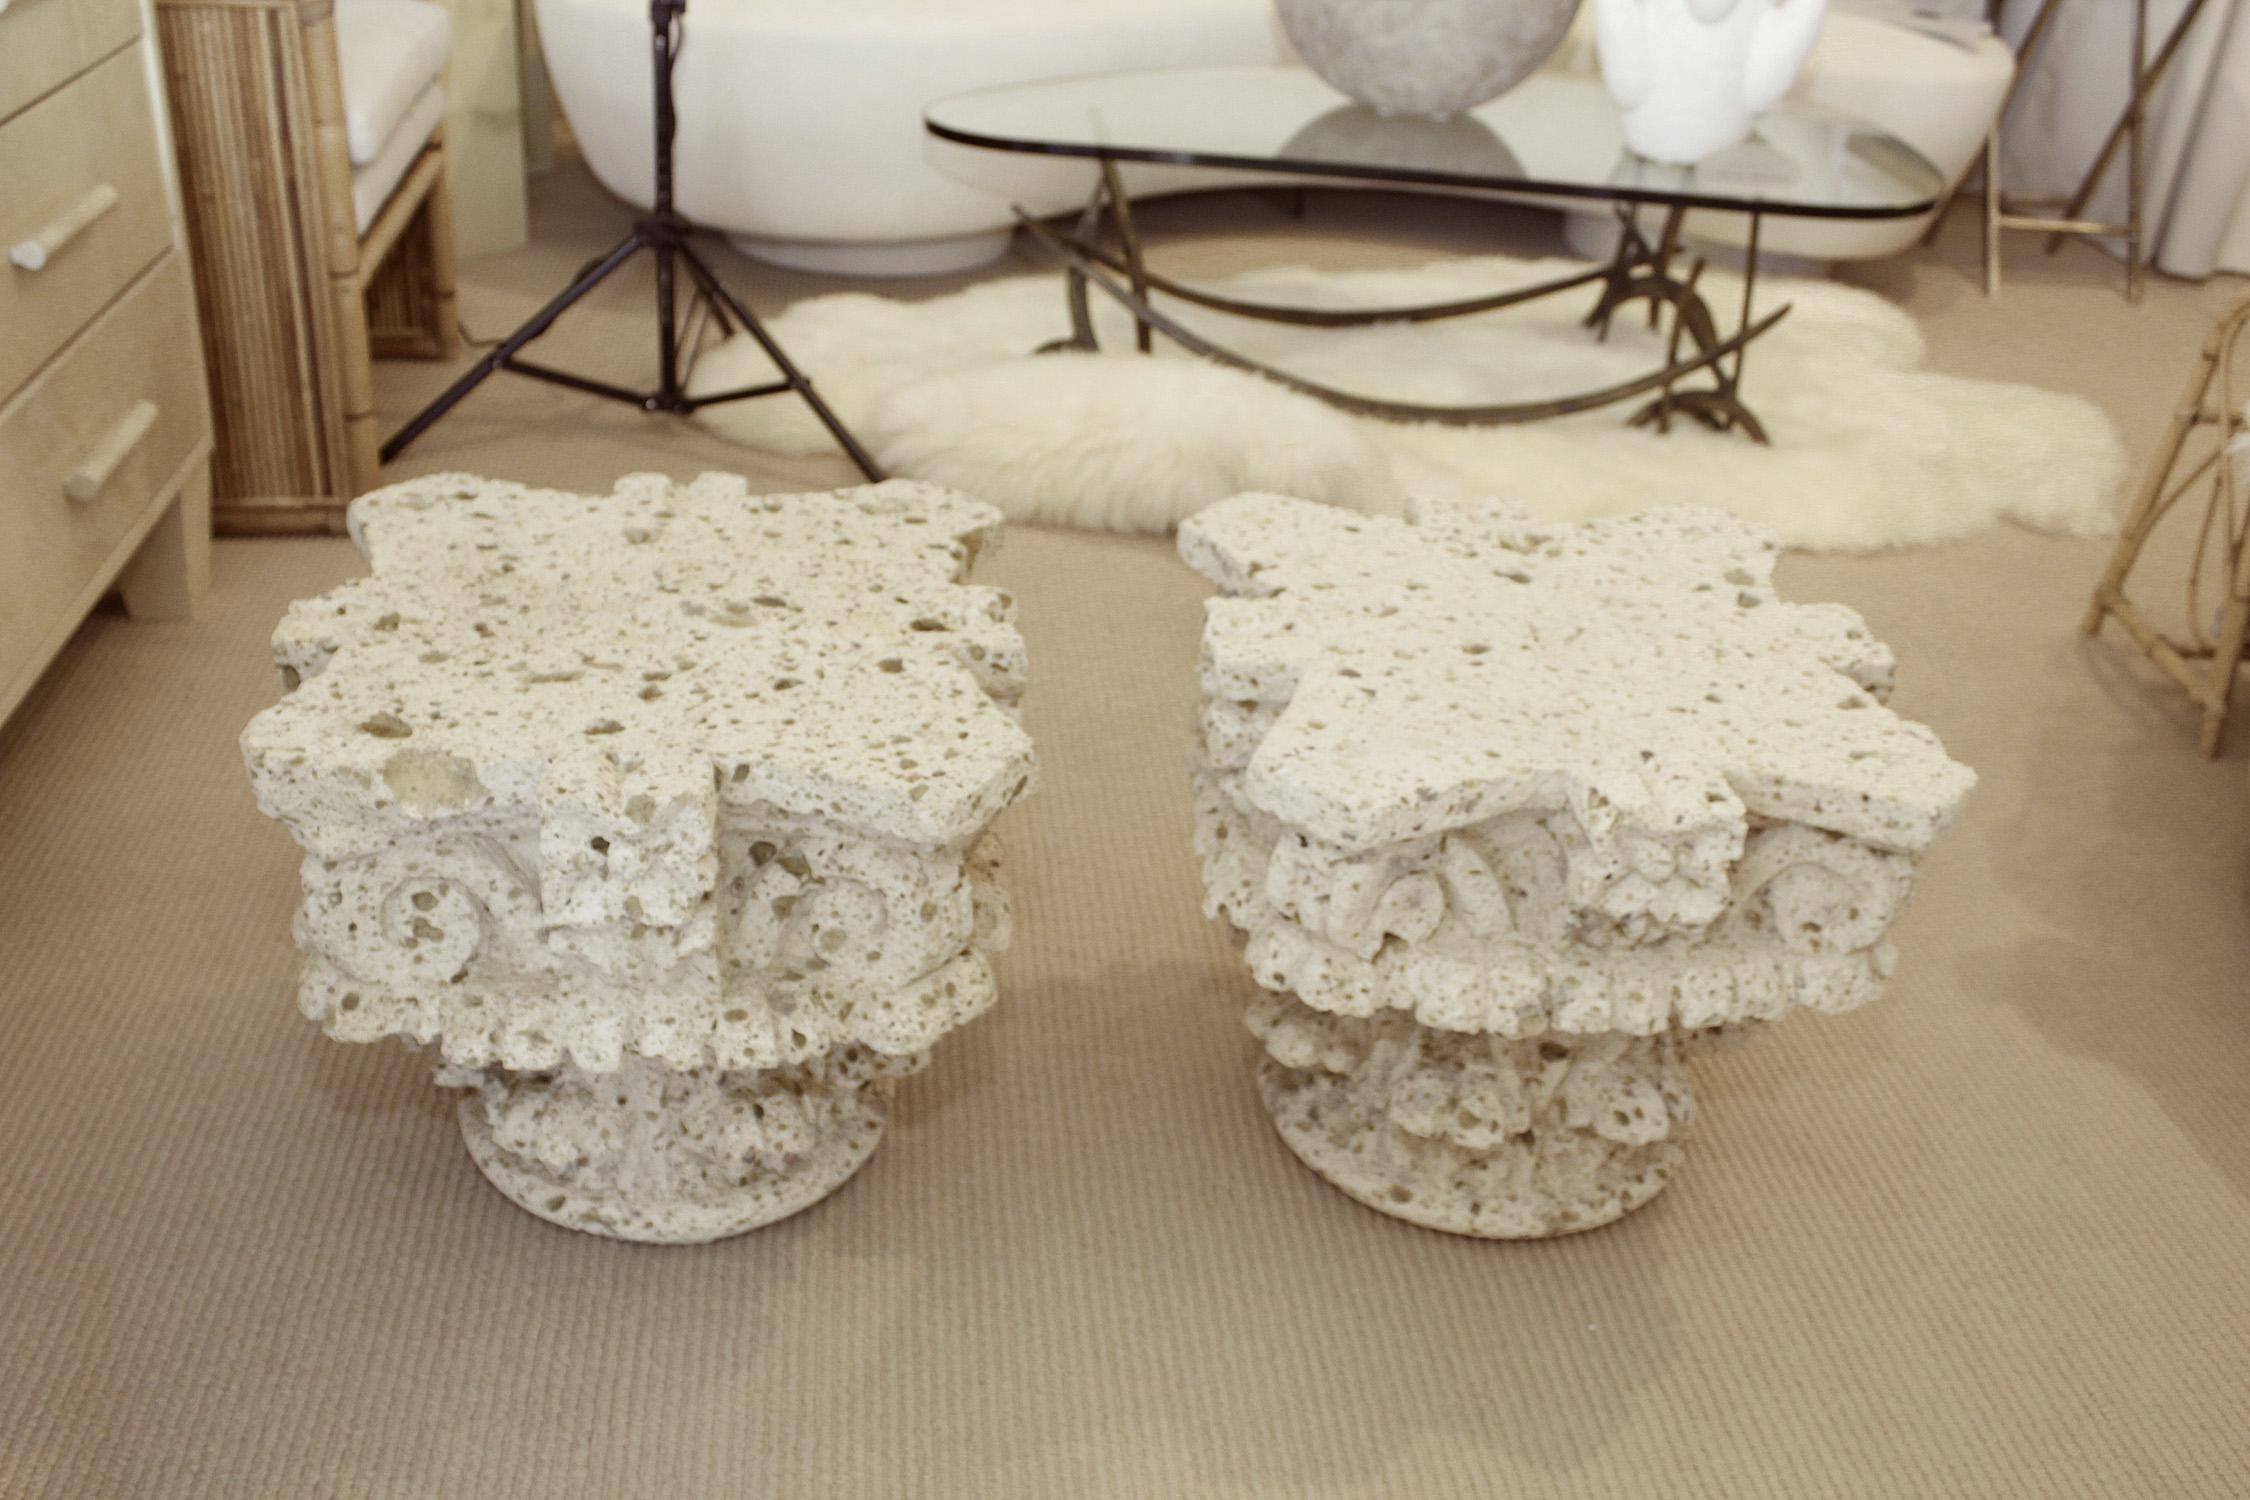 Pair of 1970s Palm Beach-chic side tables are Corinthian column capitals, hand-carved from blocks of limestone aggregate. Rustic and sophisticated.